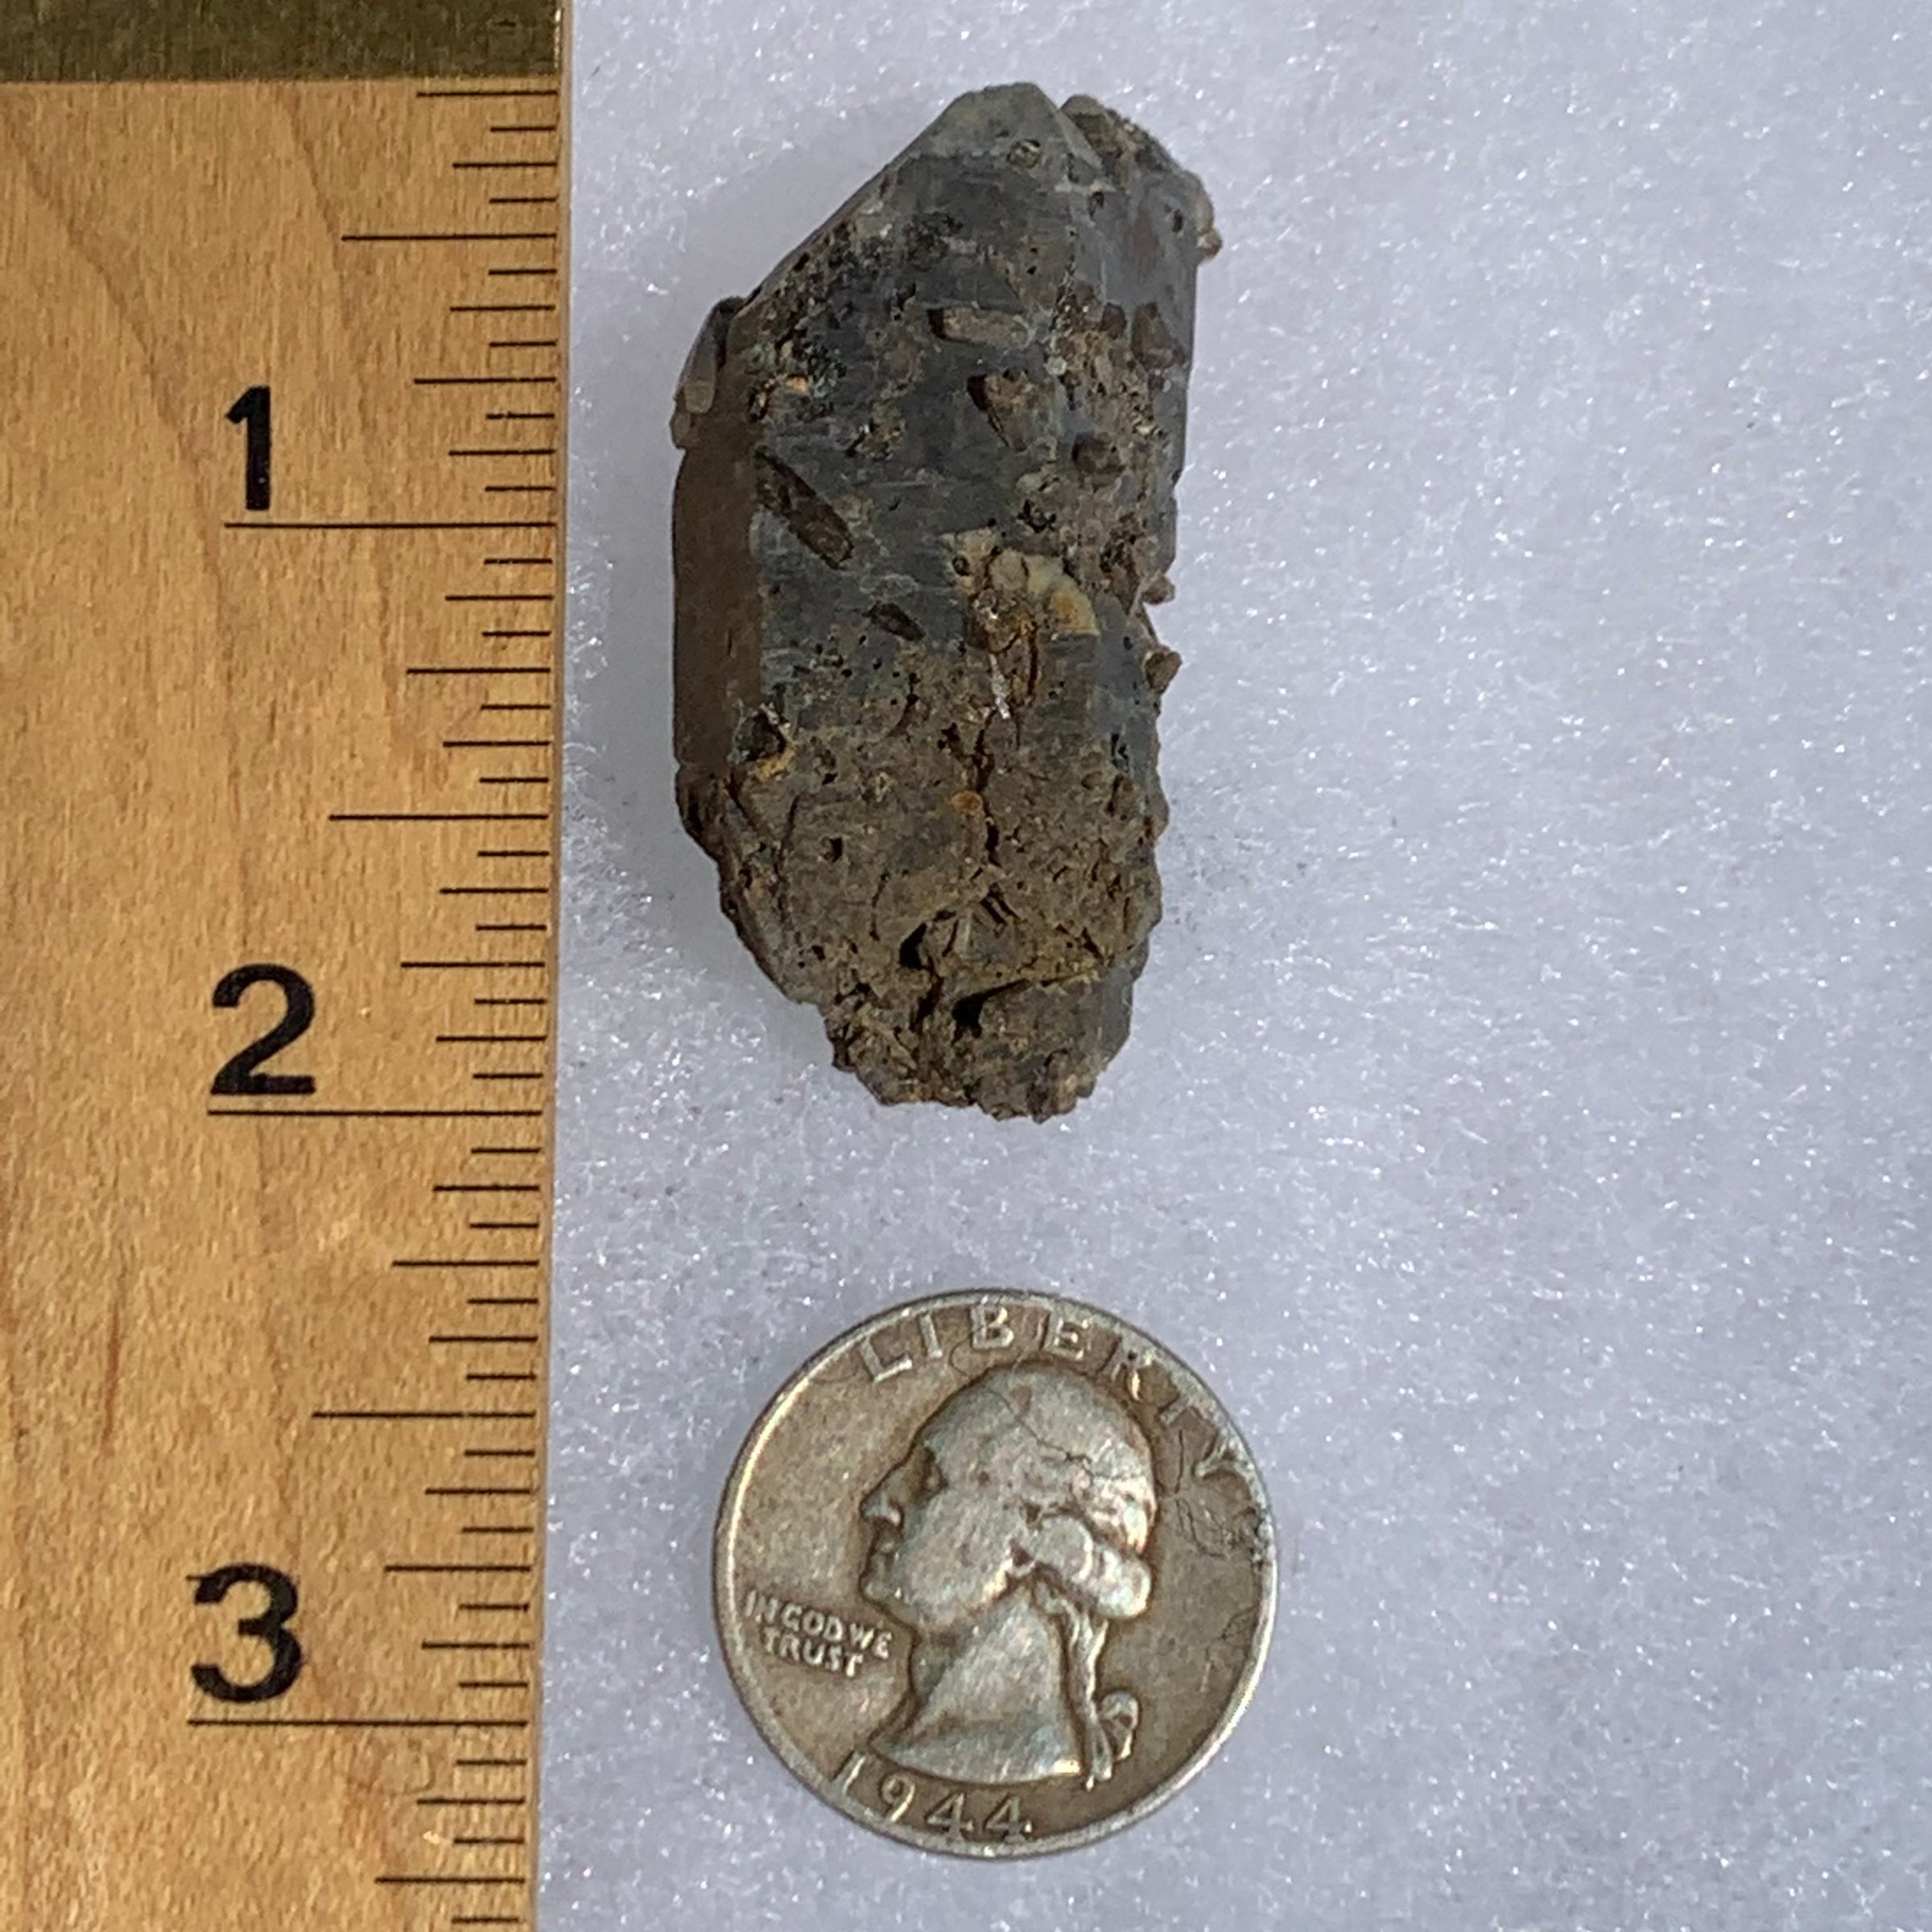 tiny brookite crystals on a smokey quartz cluster next to a ruler and a quarter for scale